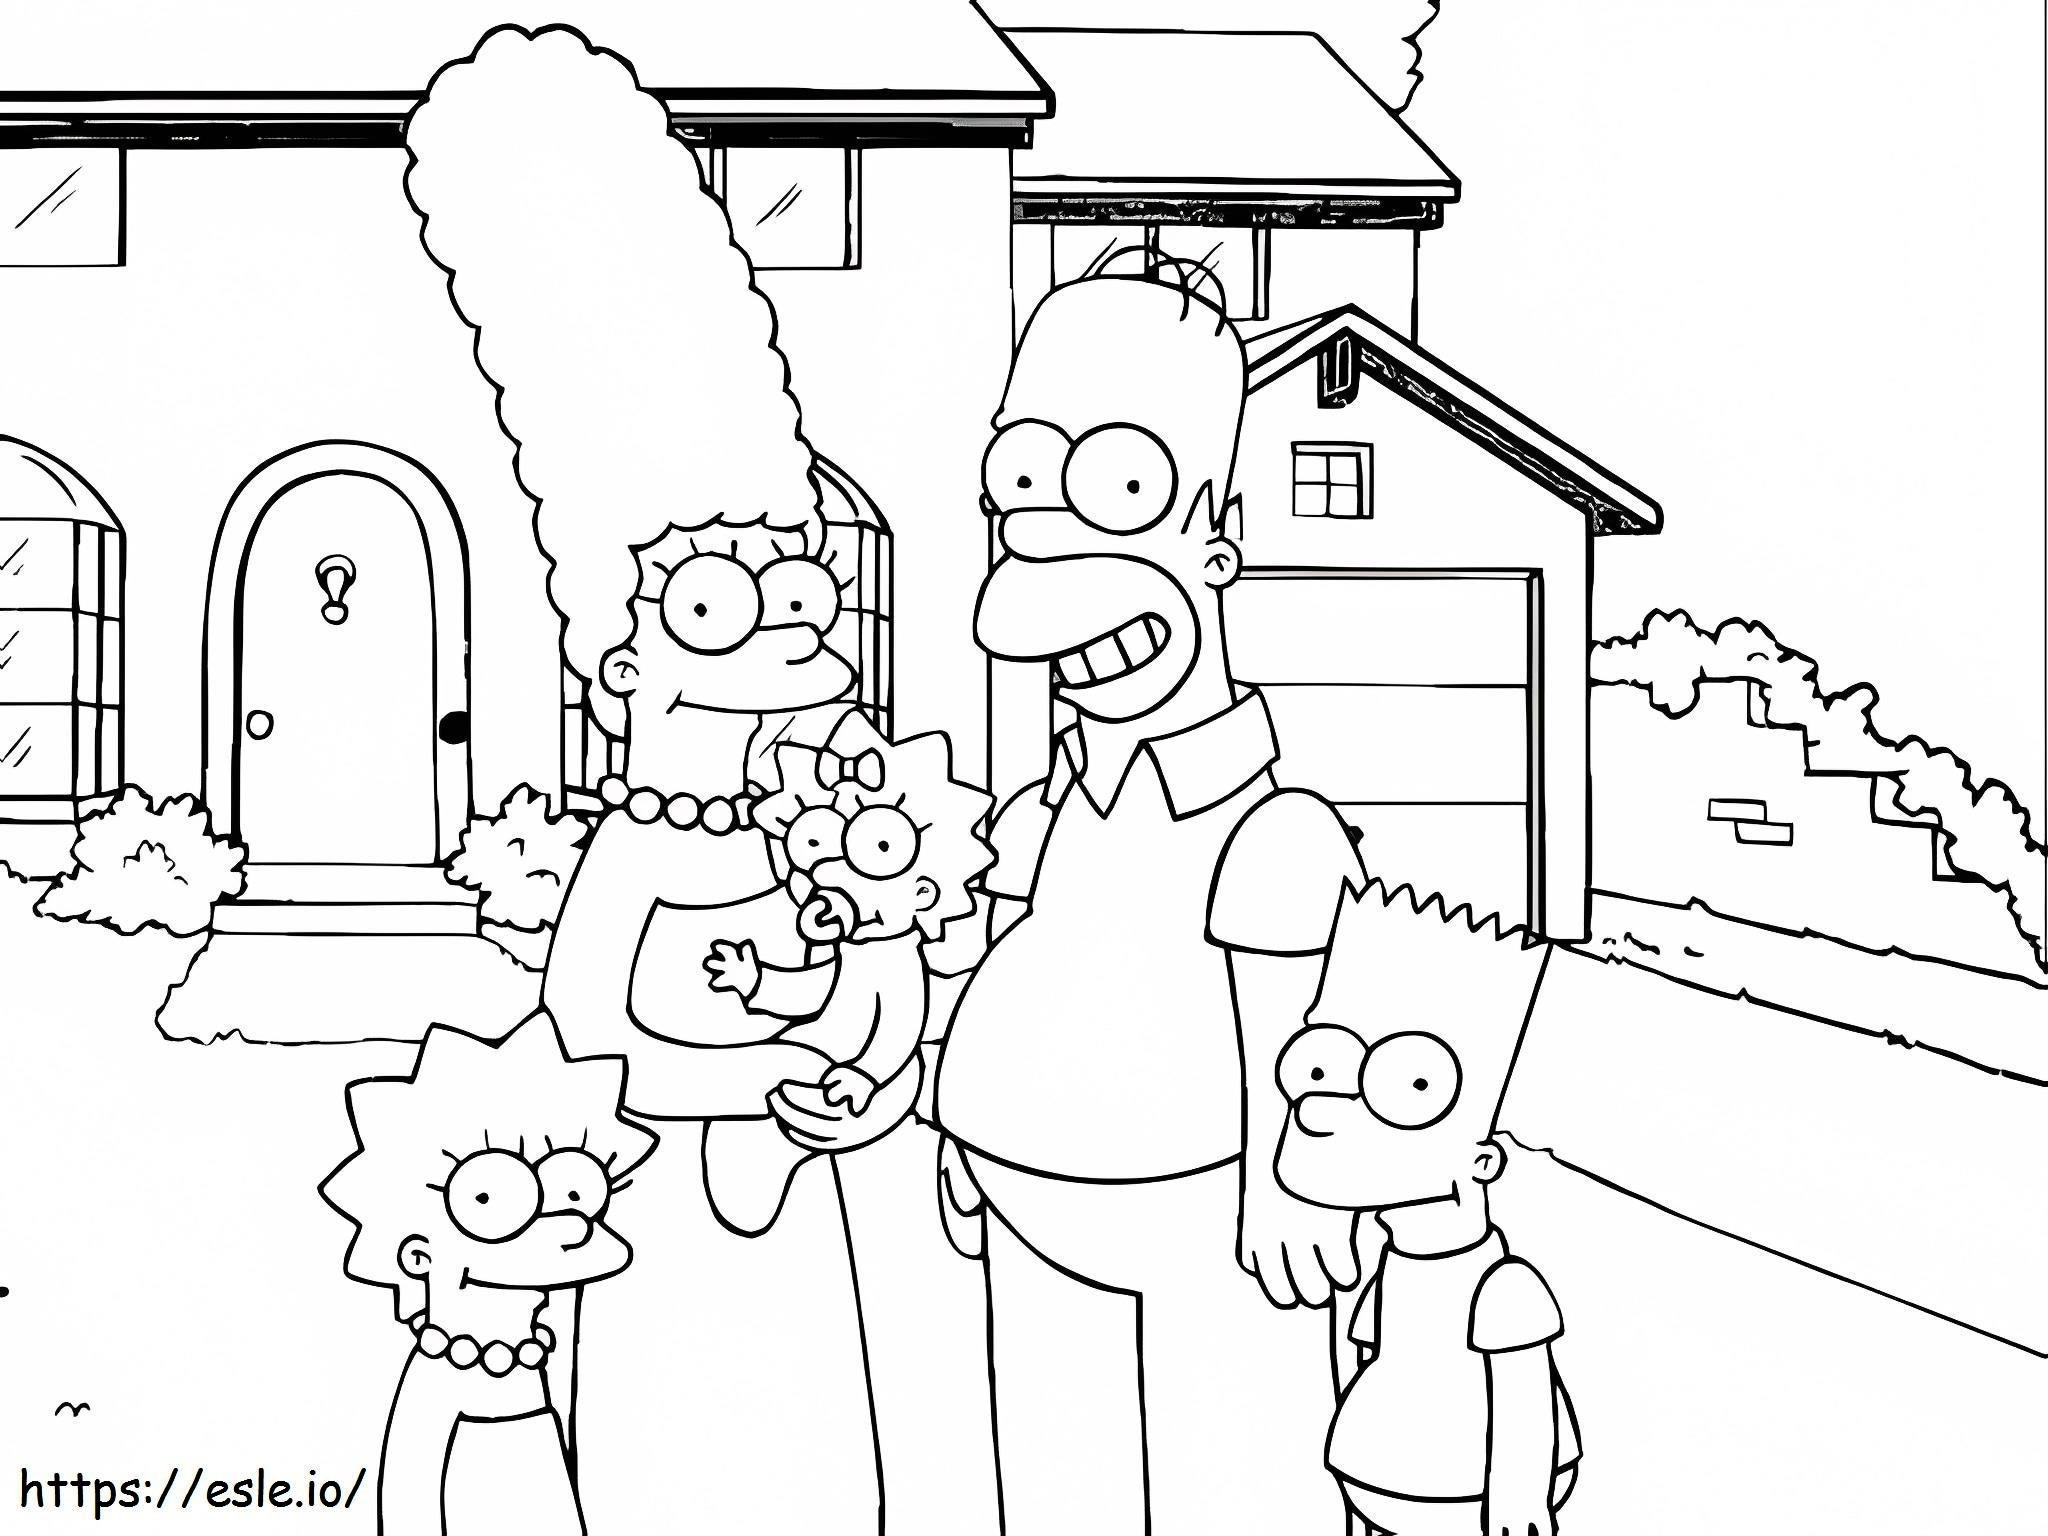 Cute Family The Simpsons coloring page